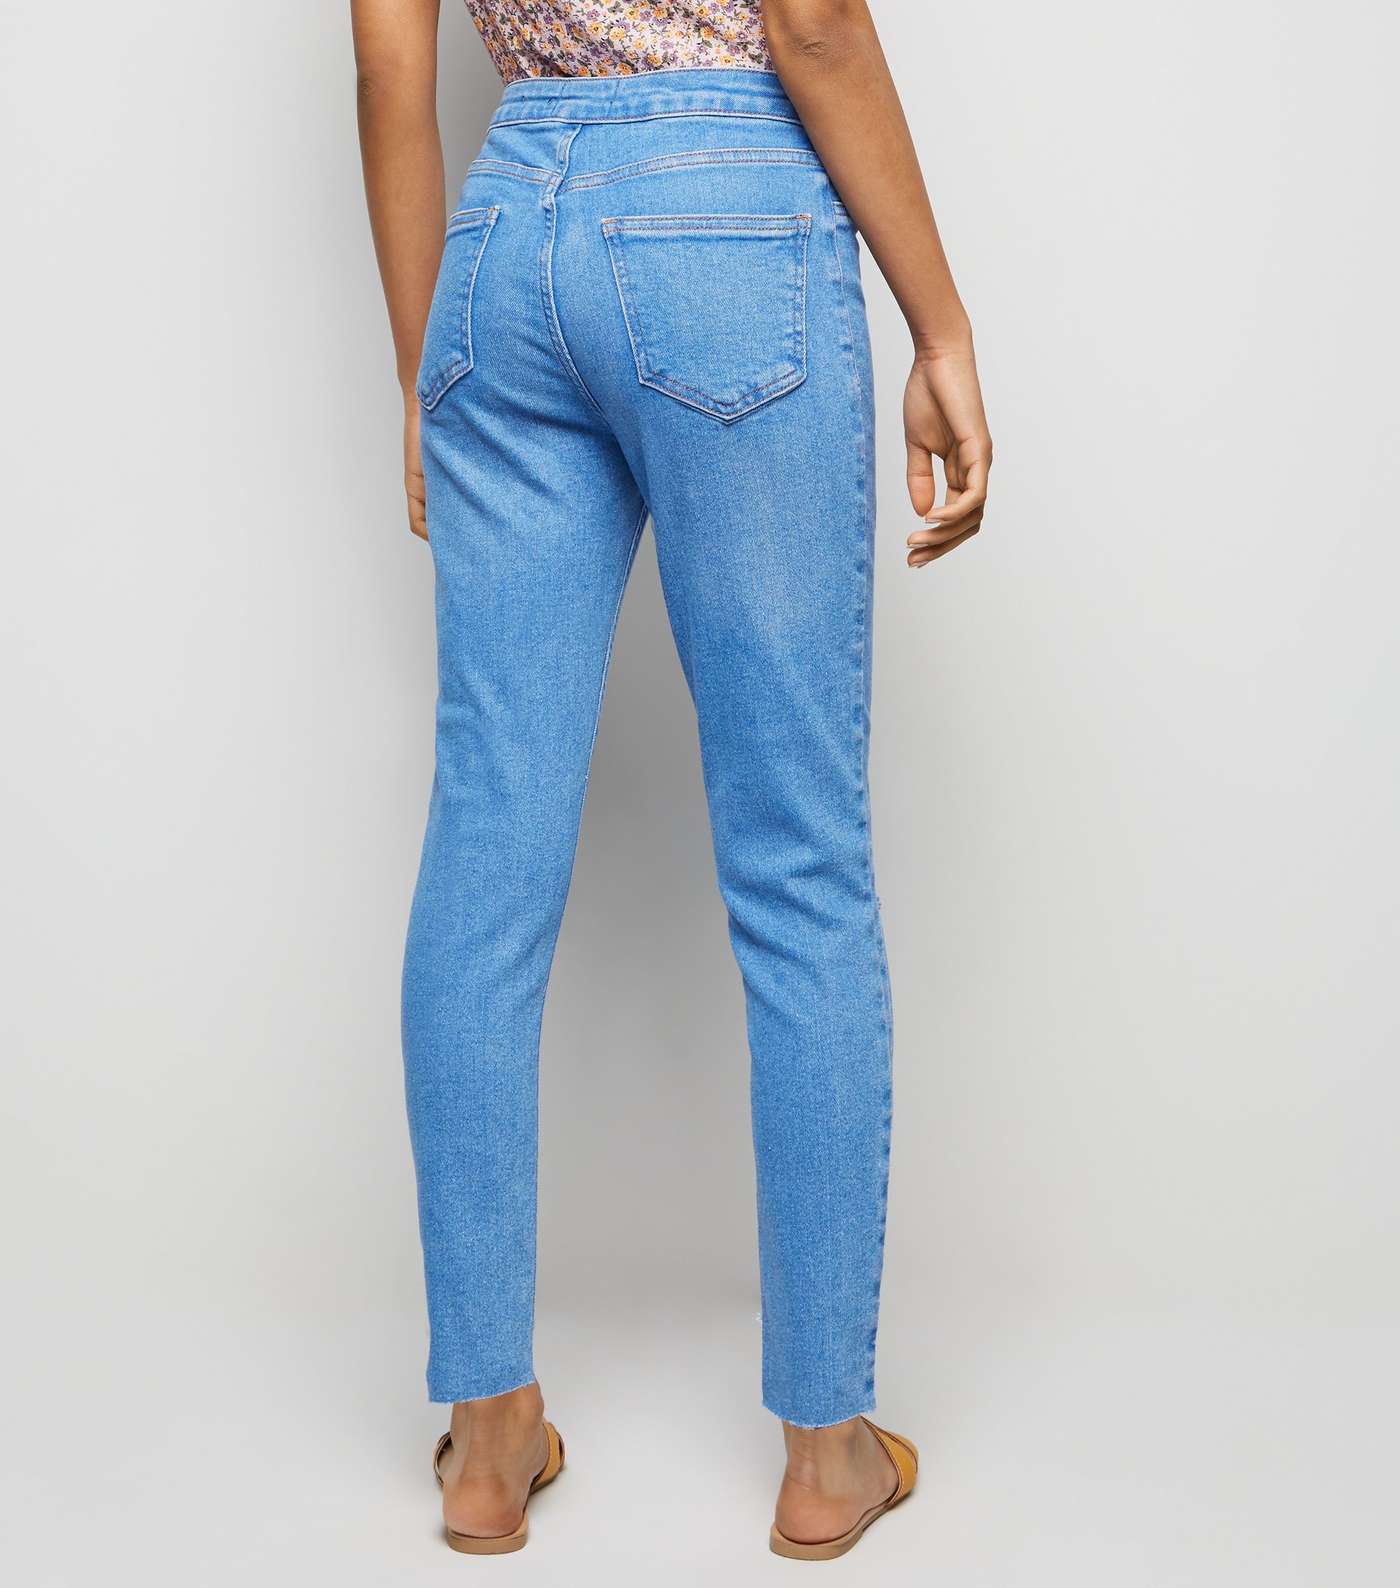 Petite Bright Blue High Waist Ripped Skinny Jeans Image 3